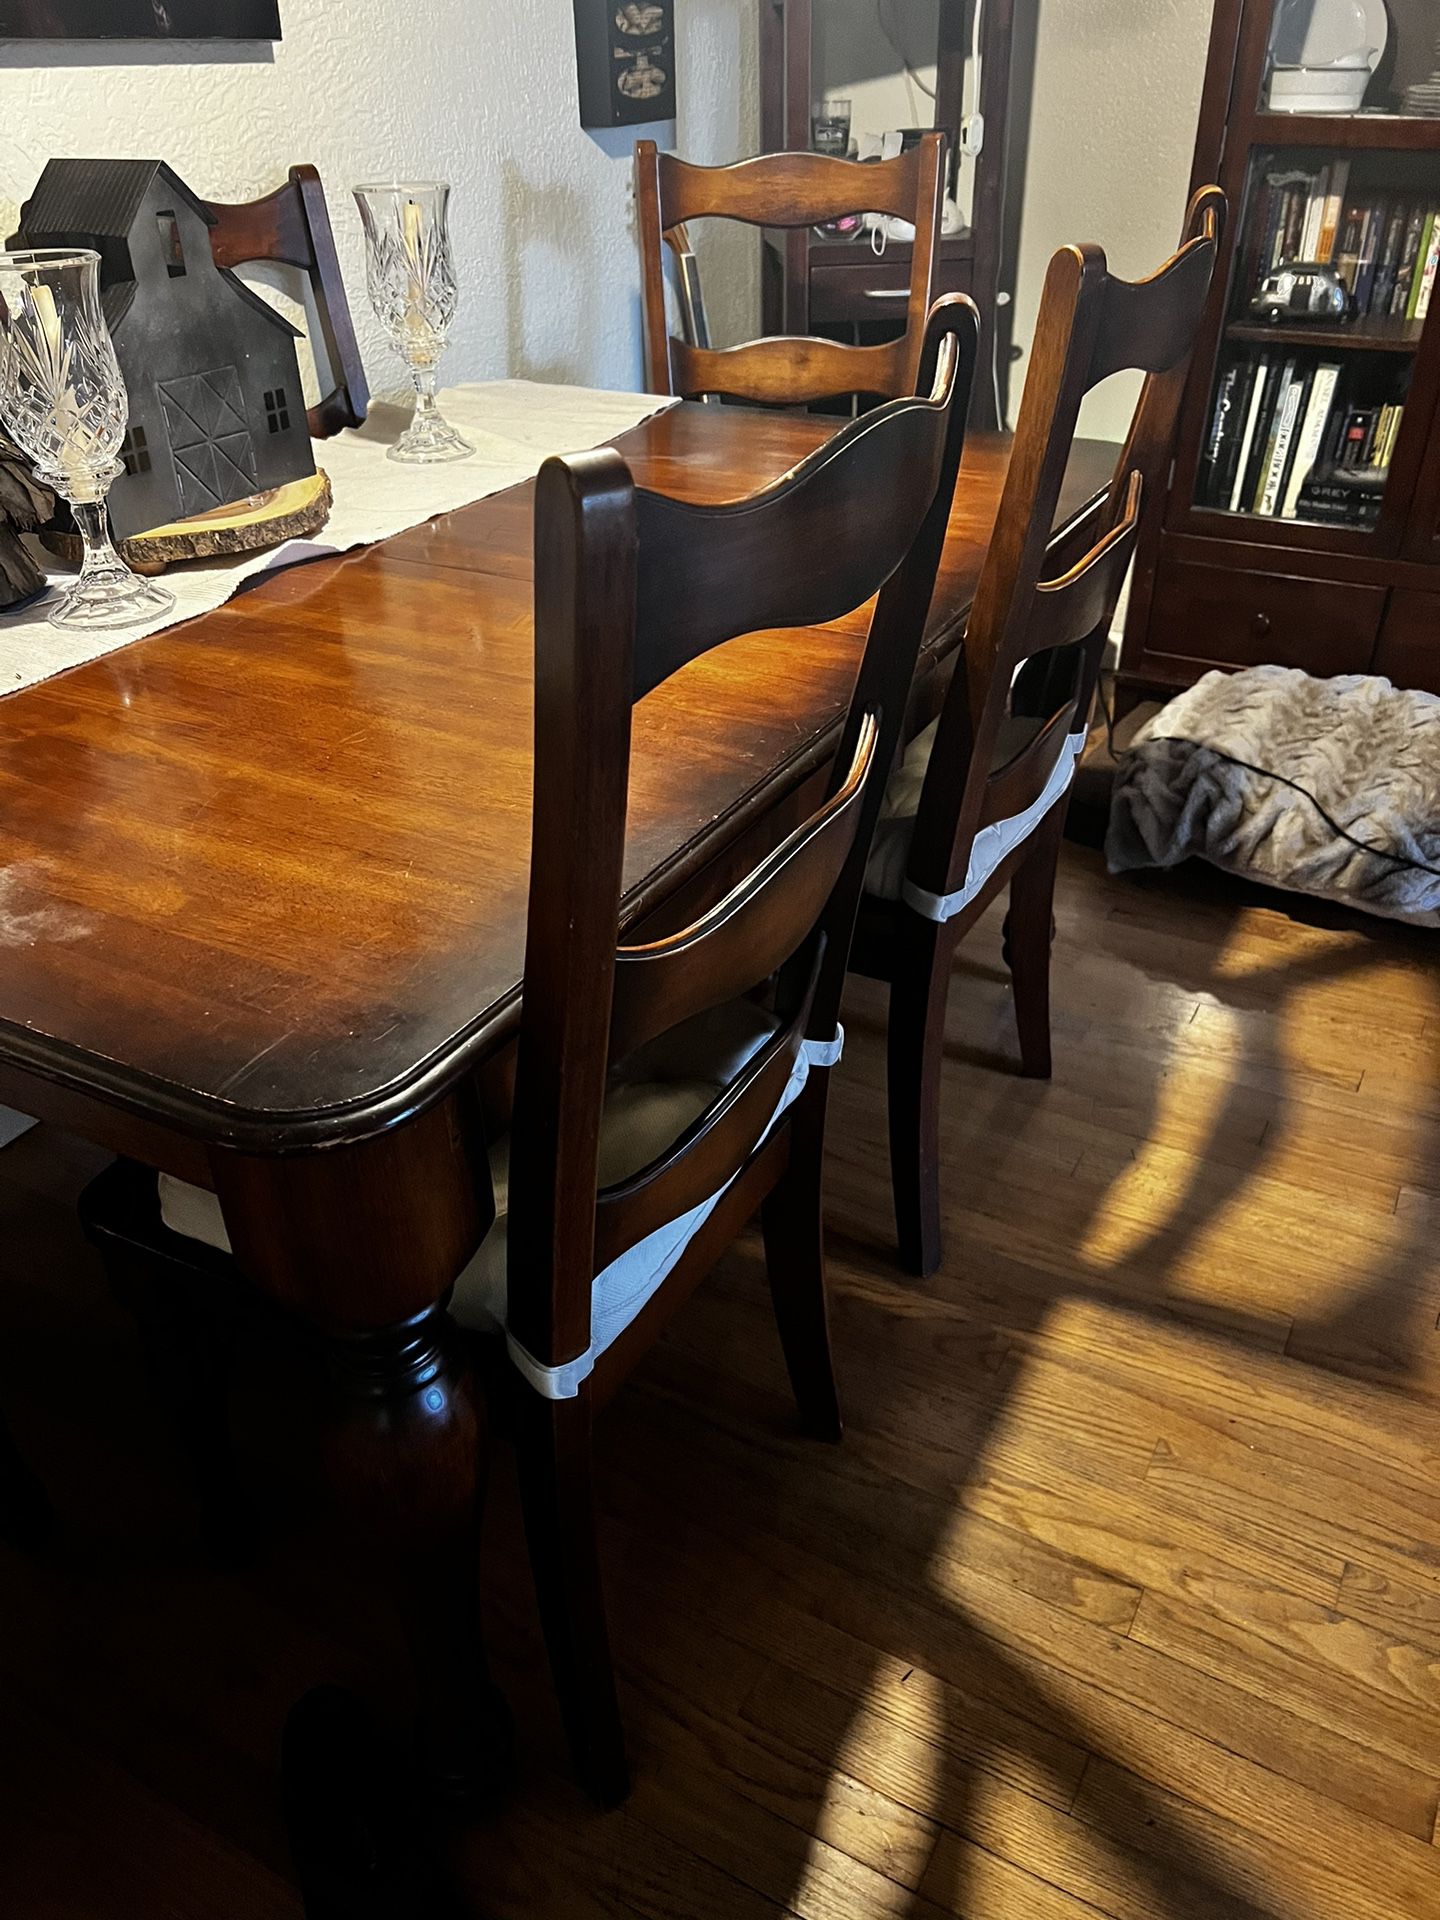 Solid Cherry Wood Dining Table With 6 Chairs